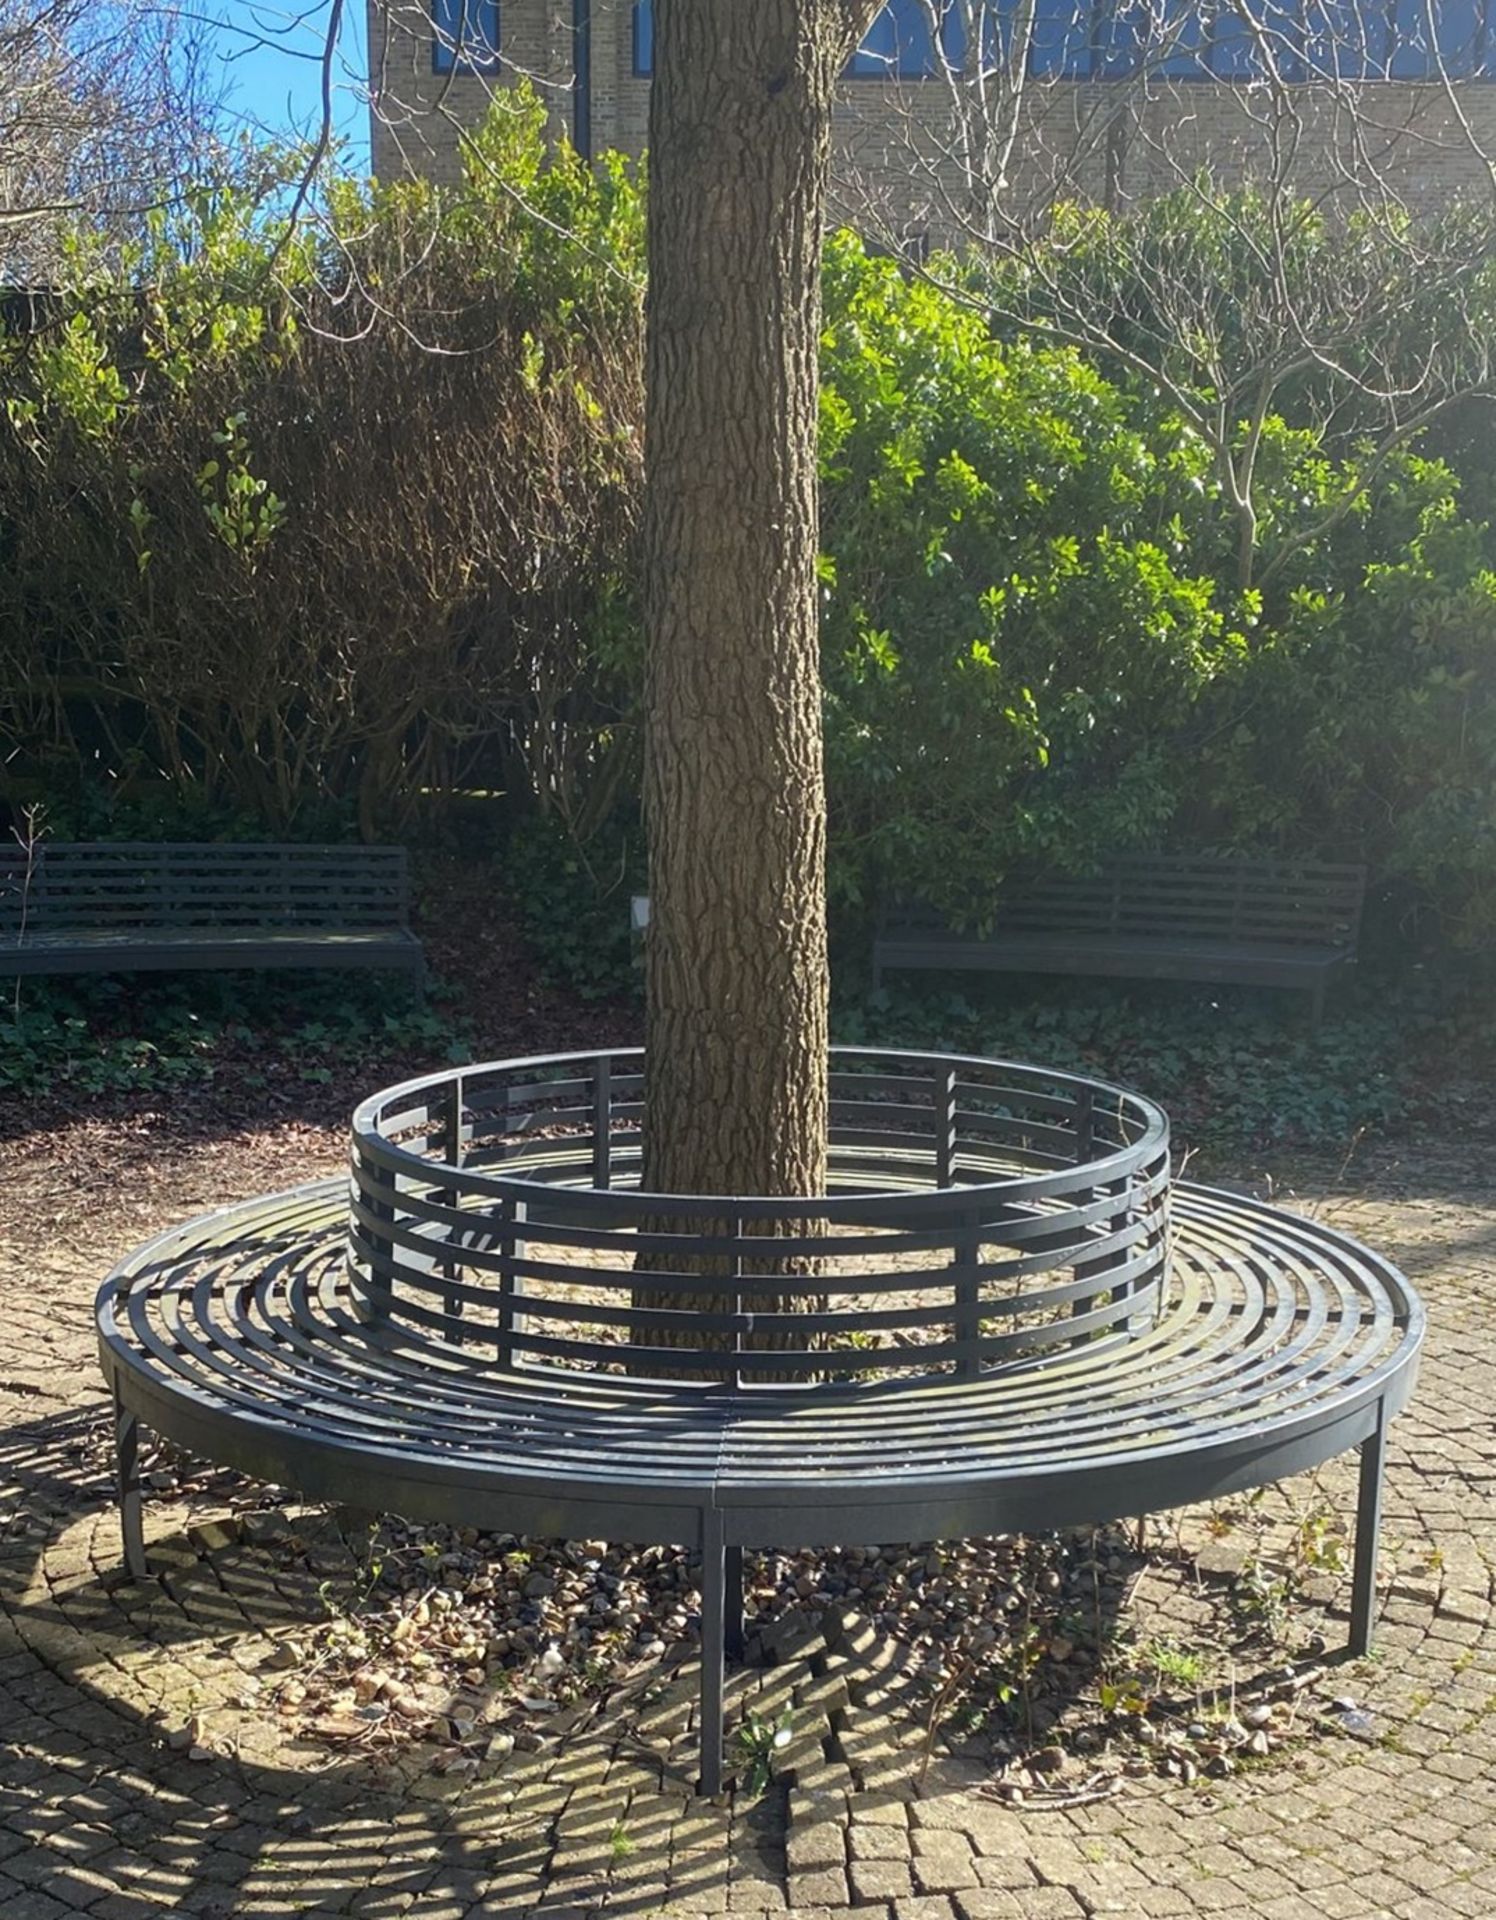 1 x Round Metal Seating Tree Bench With Slatted Seats / Backrests - Diameter: 250cms - Image 2 of 4